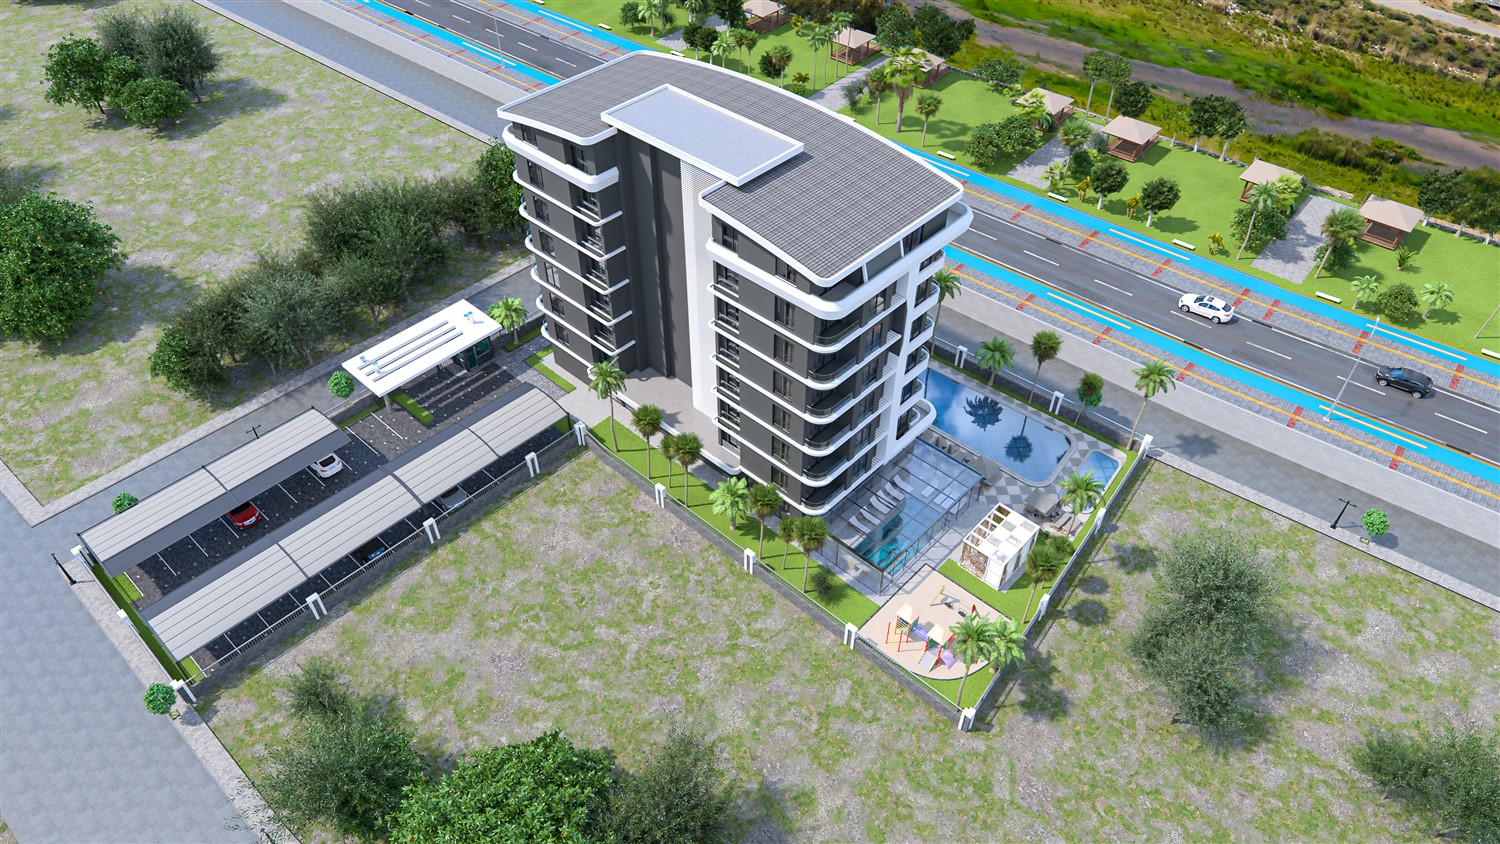 New residential complex with breathtaking views of the sea coast, located in the resort town of Gazipasa